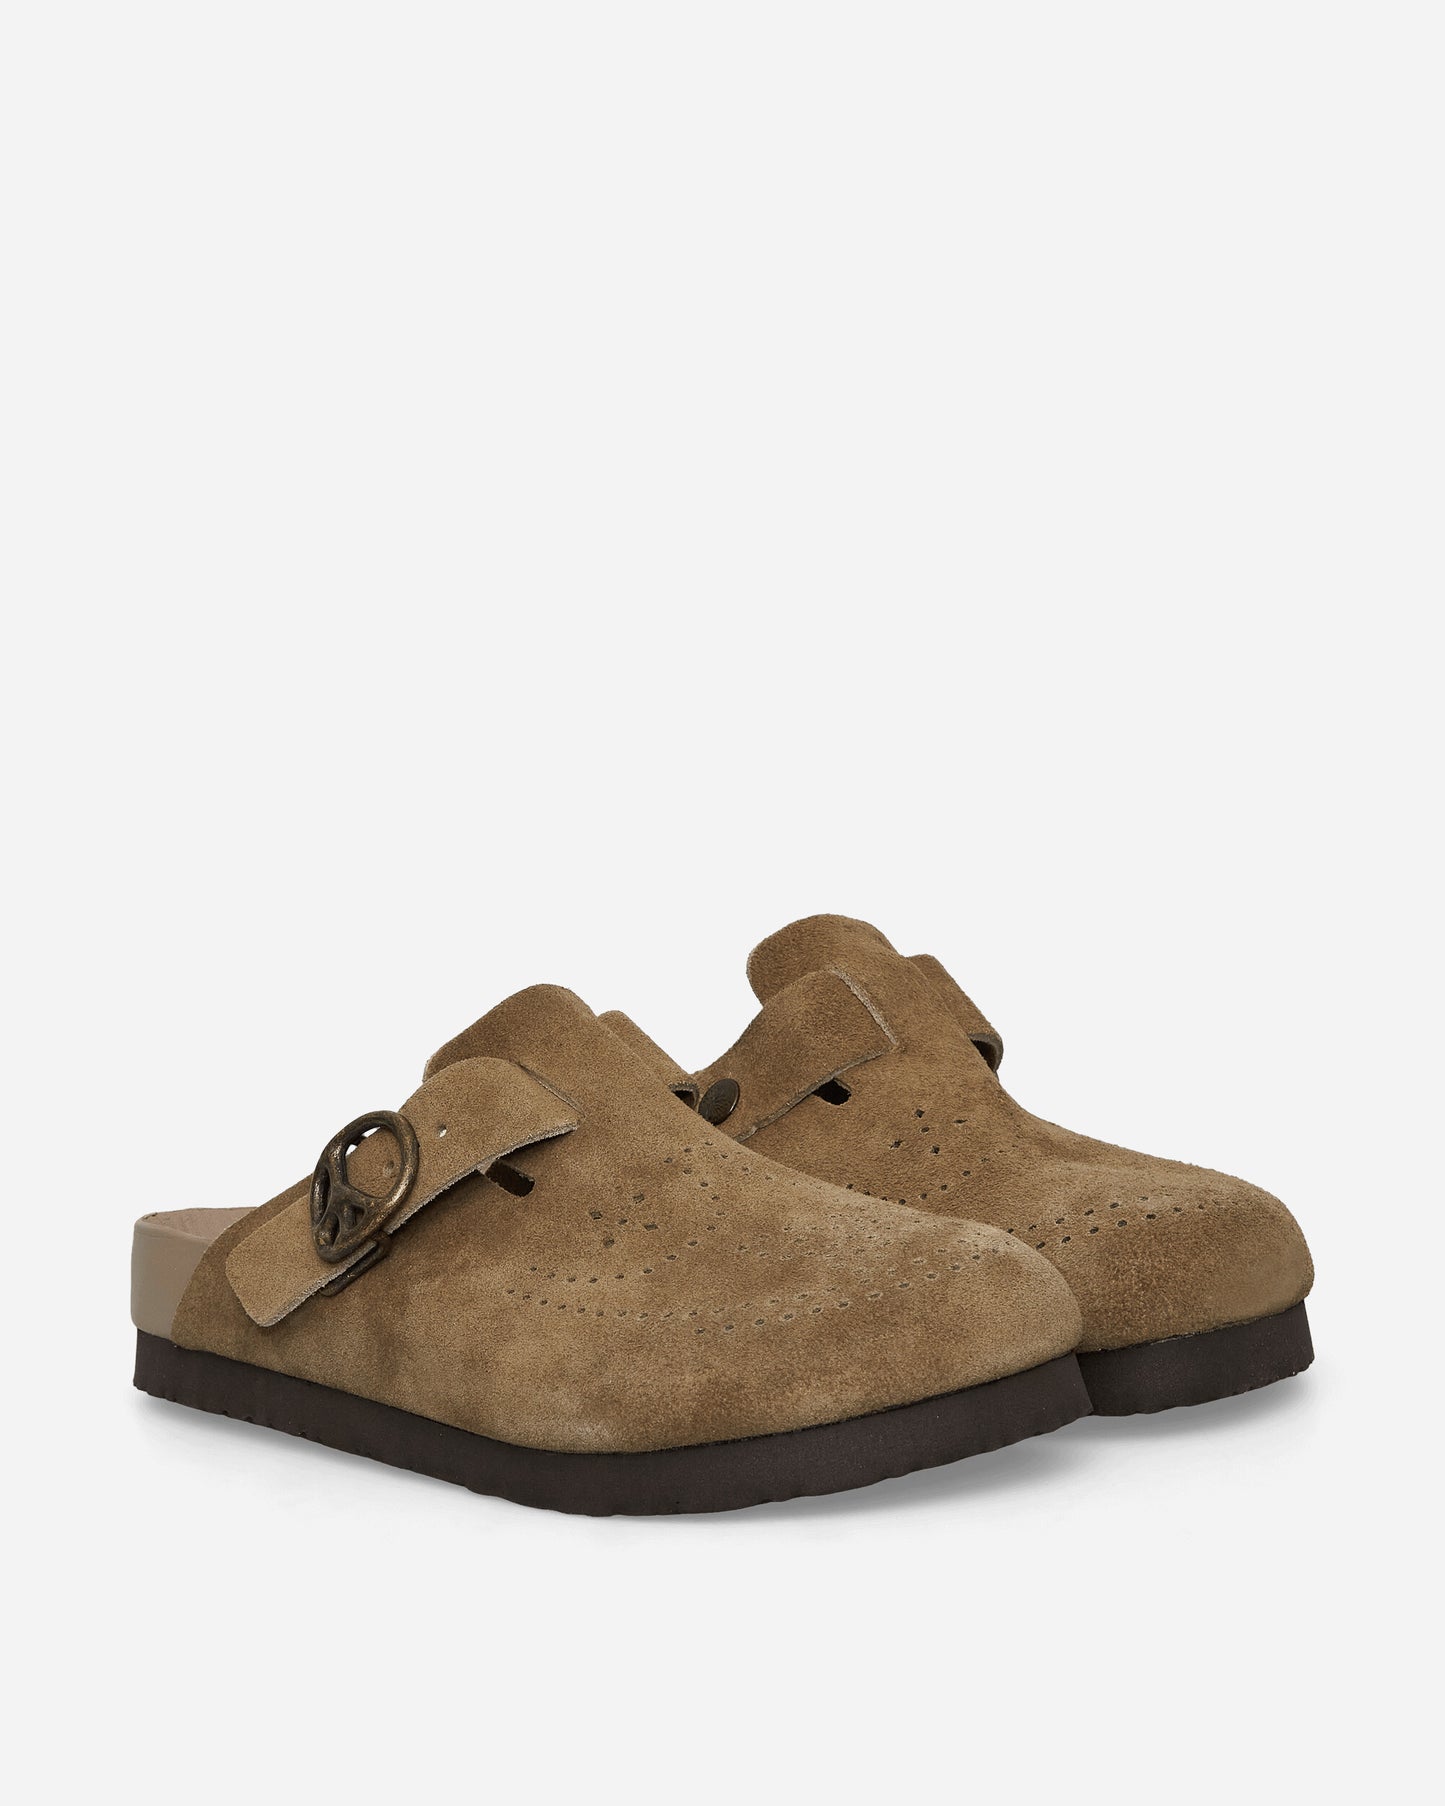 Needles Clog Sandal - Suede Lthr. Taupe Sandals and Slides Sandals and Mules OT057 A